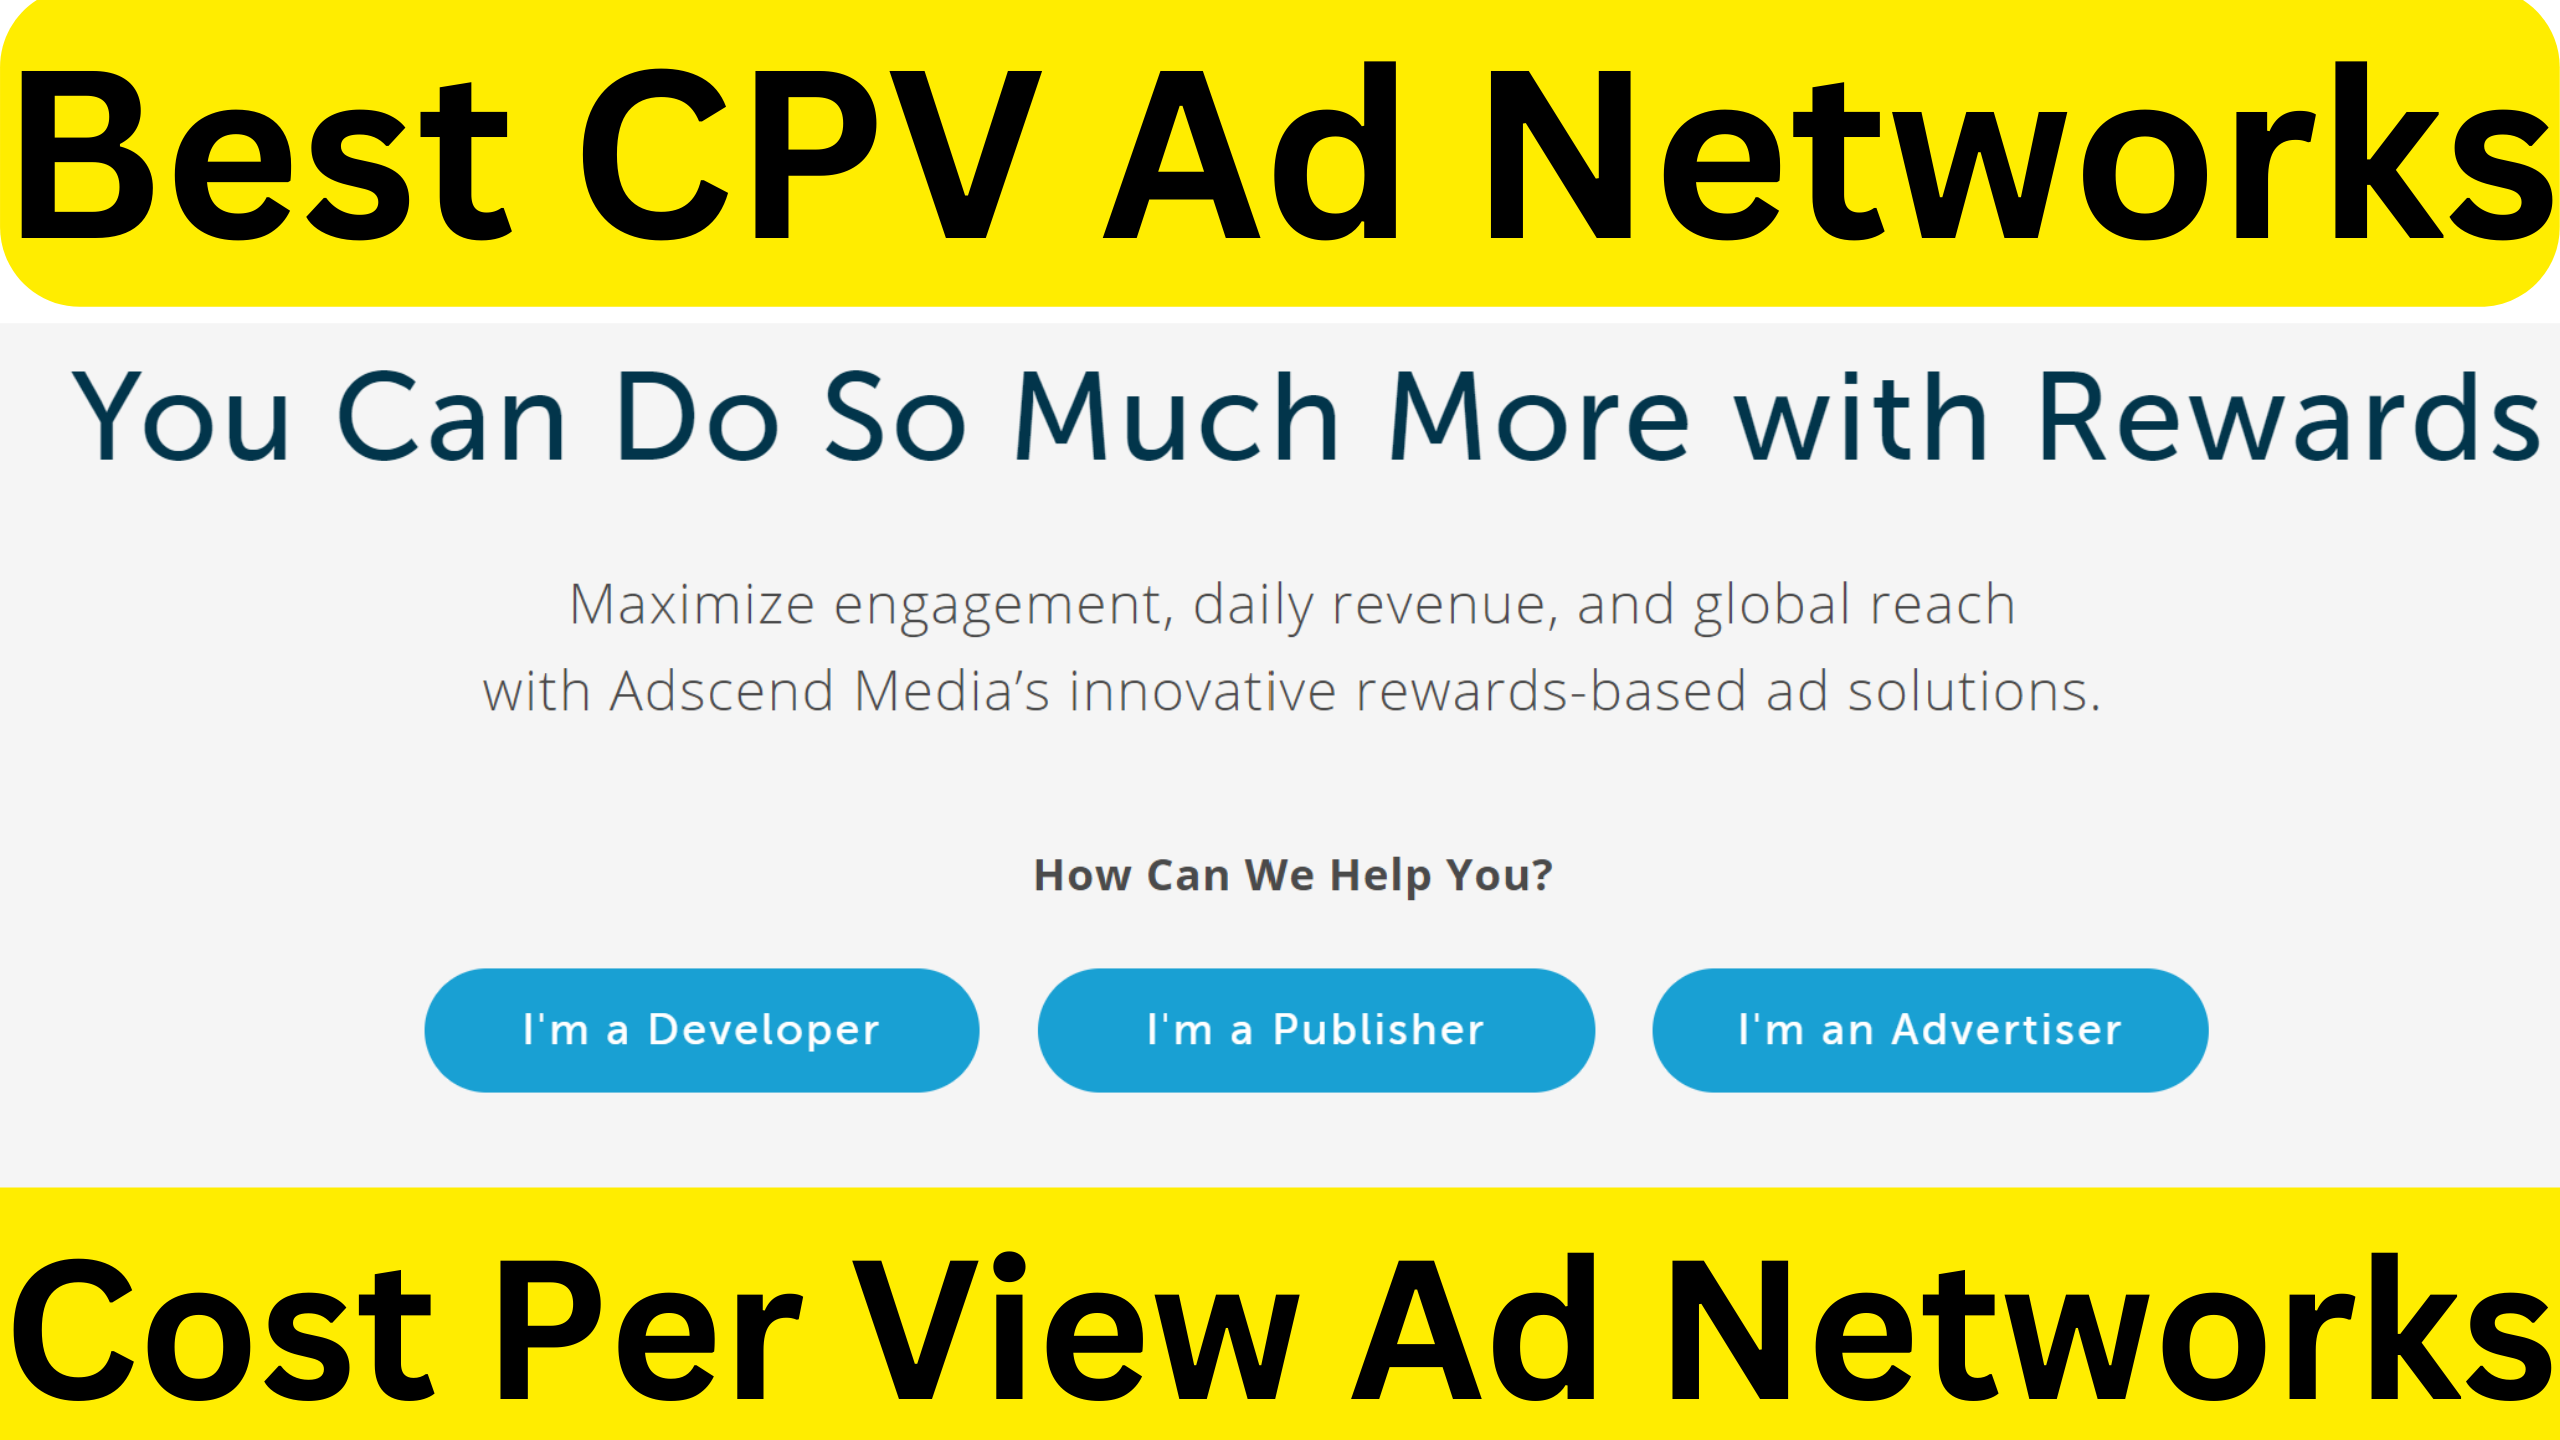 Best CPV ad Networks For Advertisers and Publishers